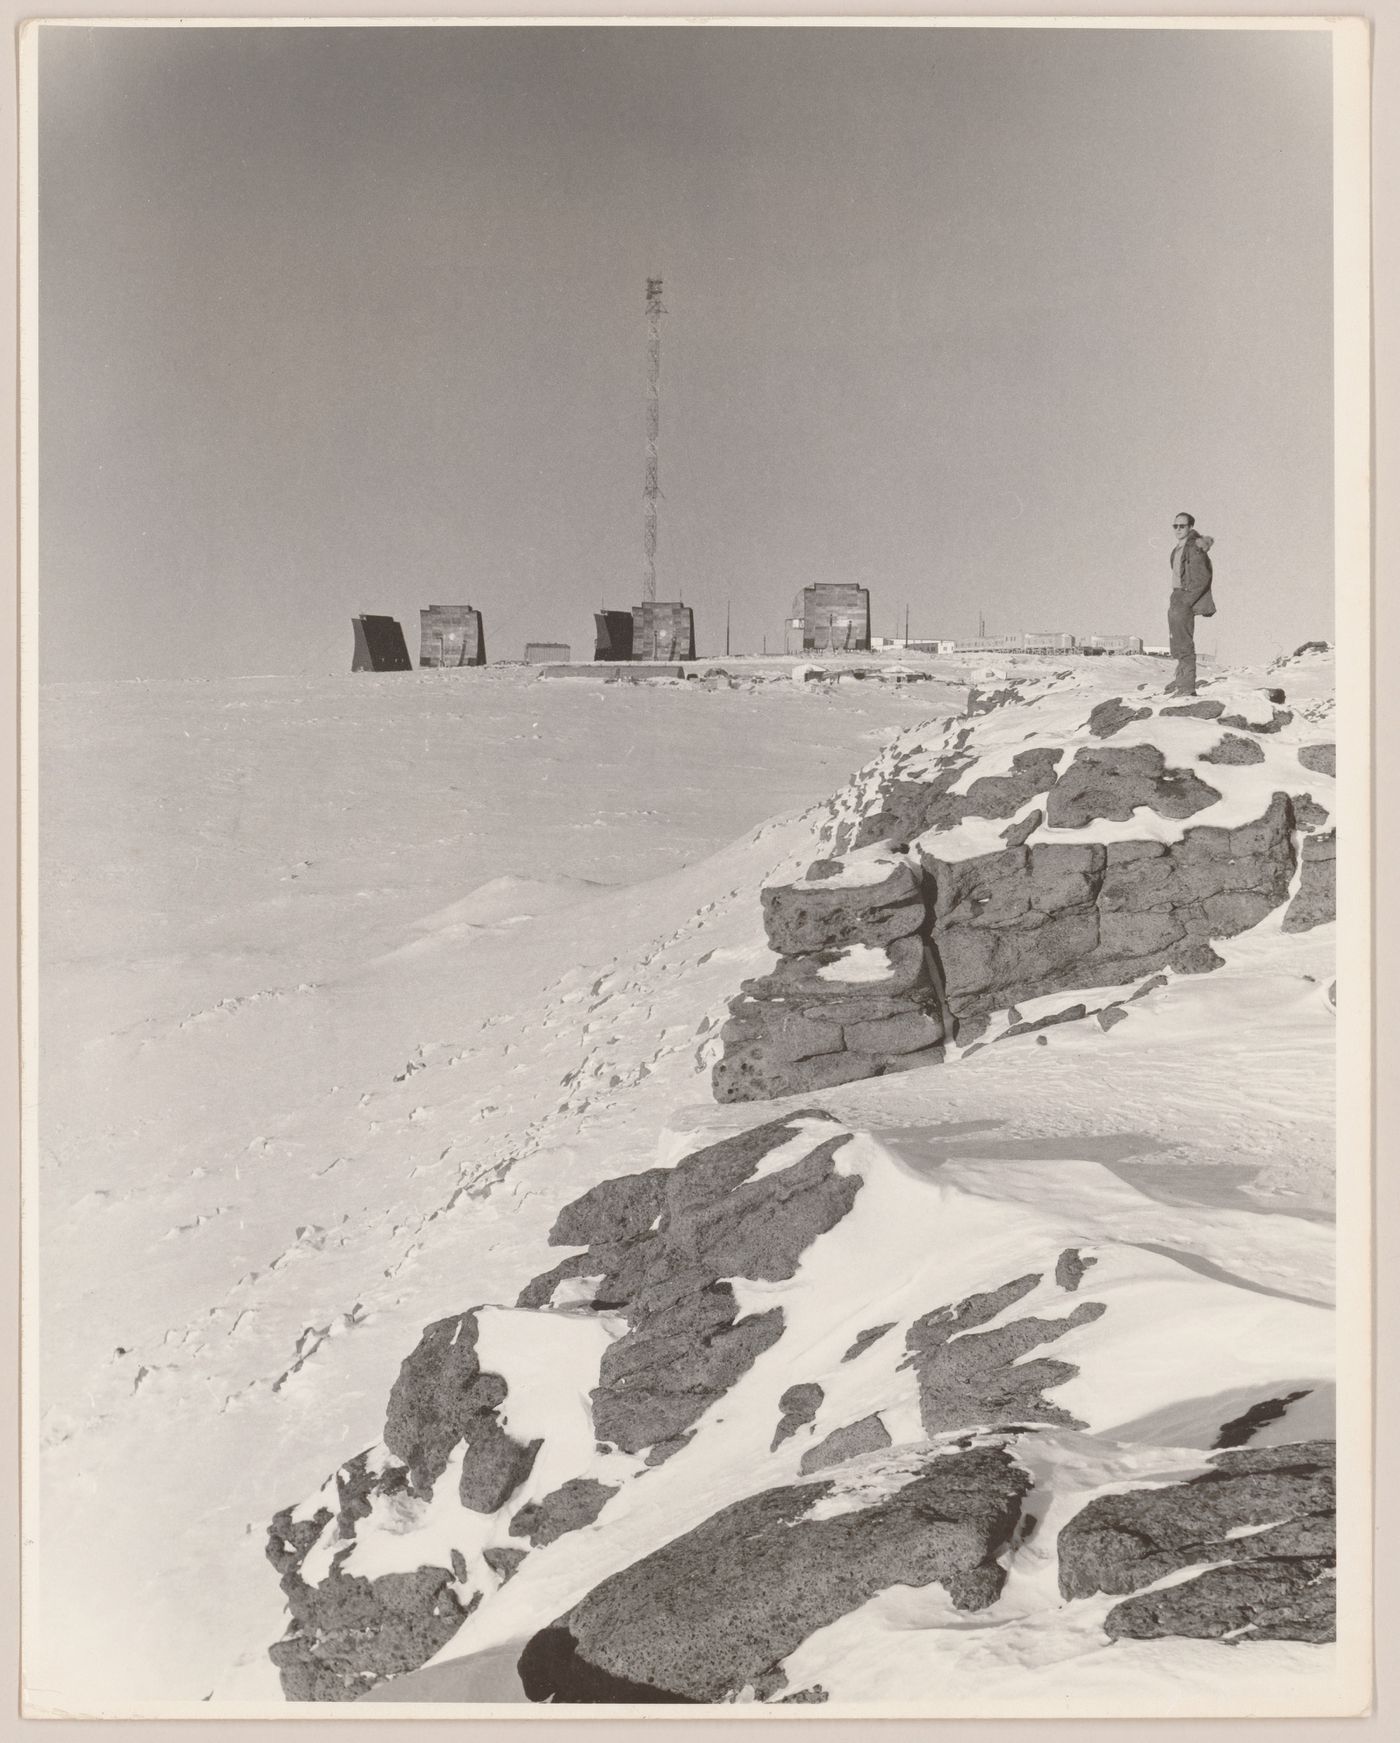 View of DEW Line radar station DYE-Main with person standing on the right, Cape Dyer, Nunavut, Canada